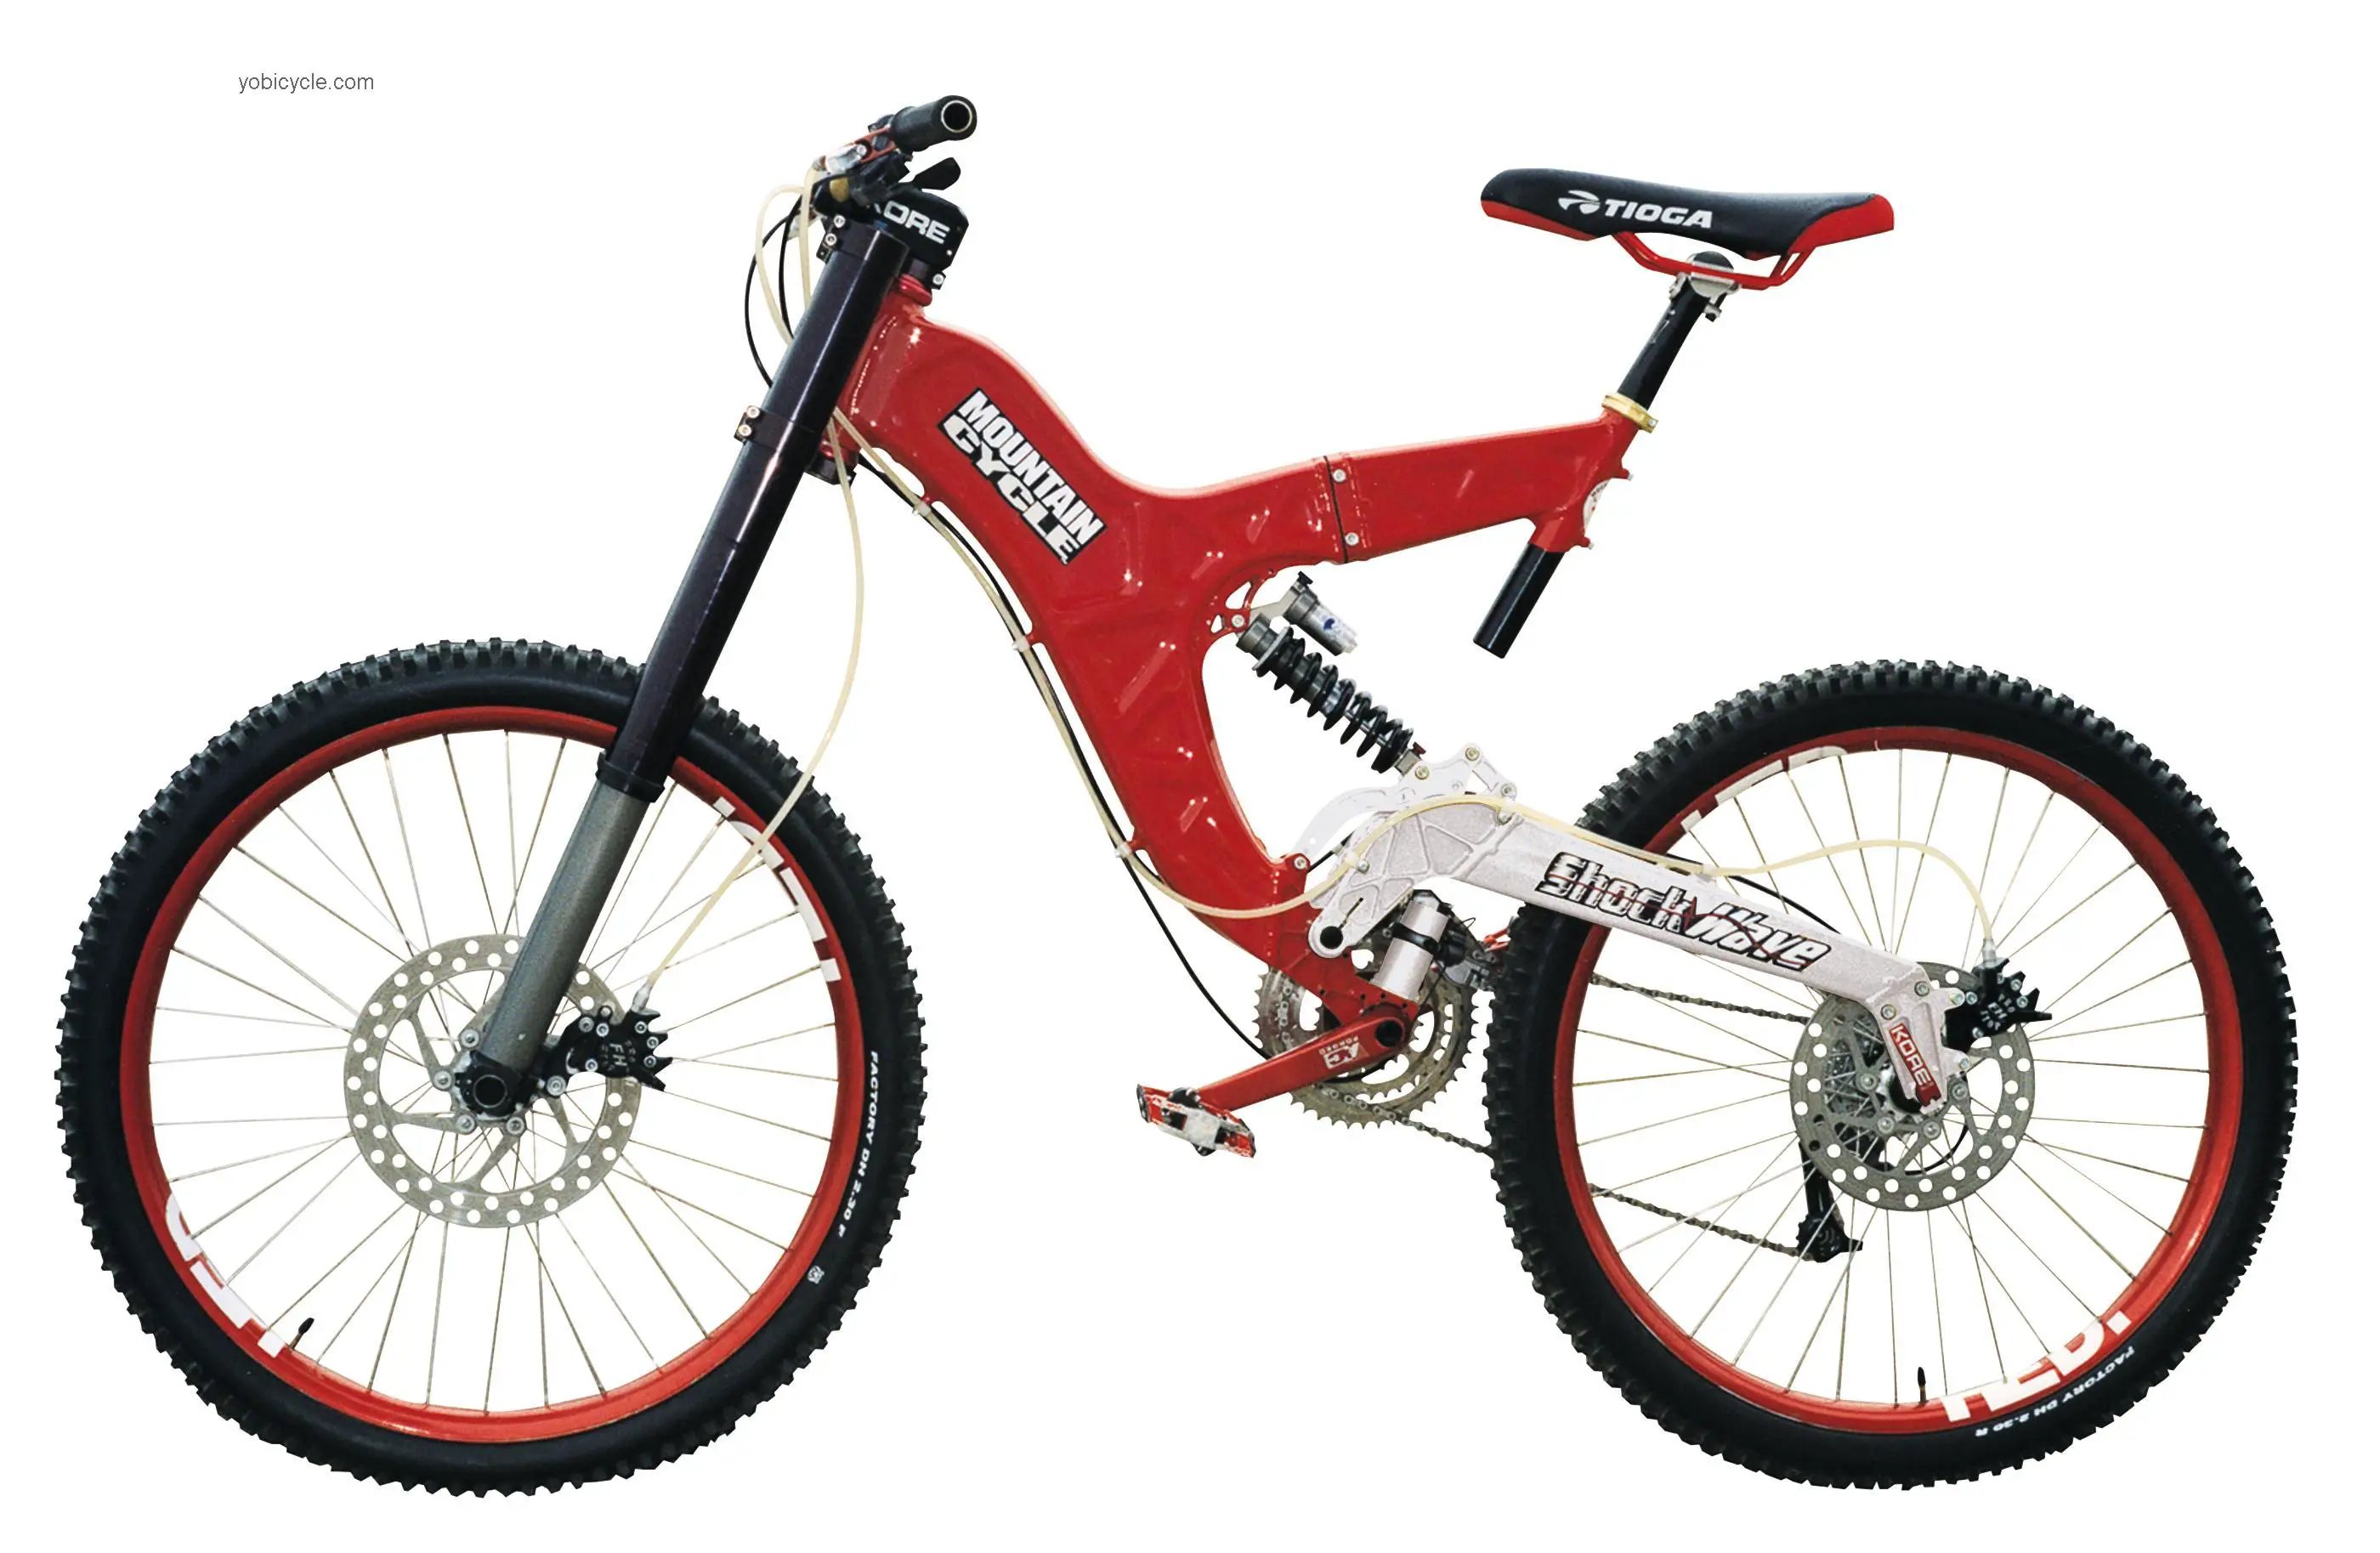 Mountain Cycle Shockwave 2000 comparison online with competitors